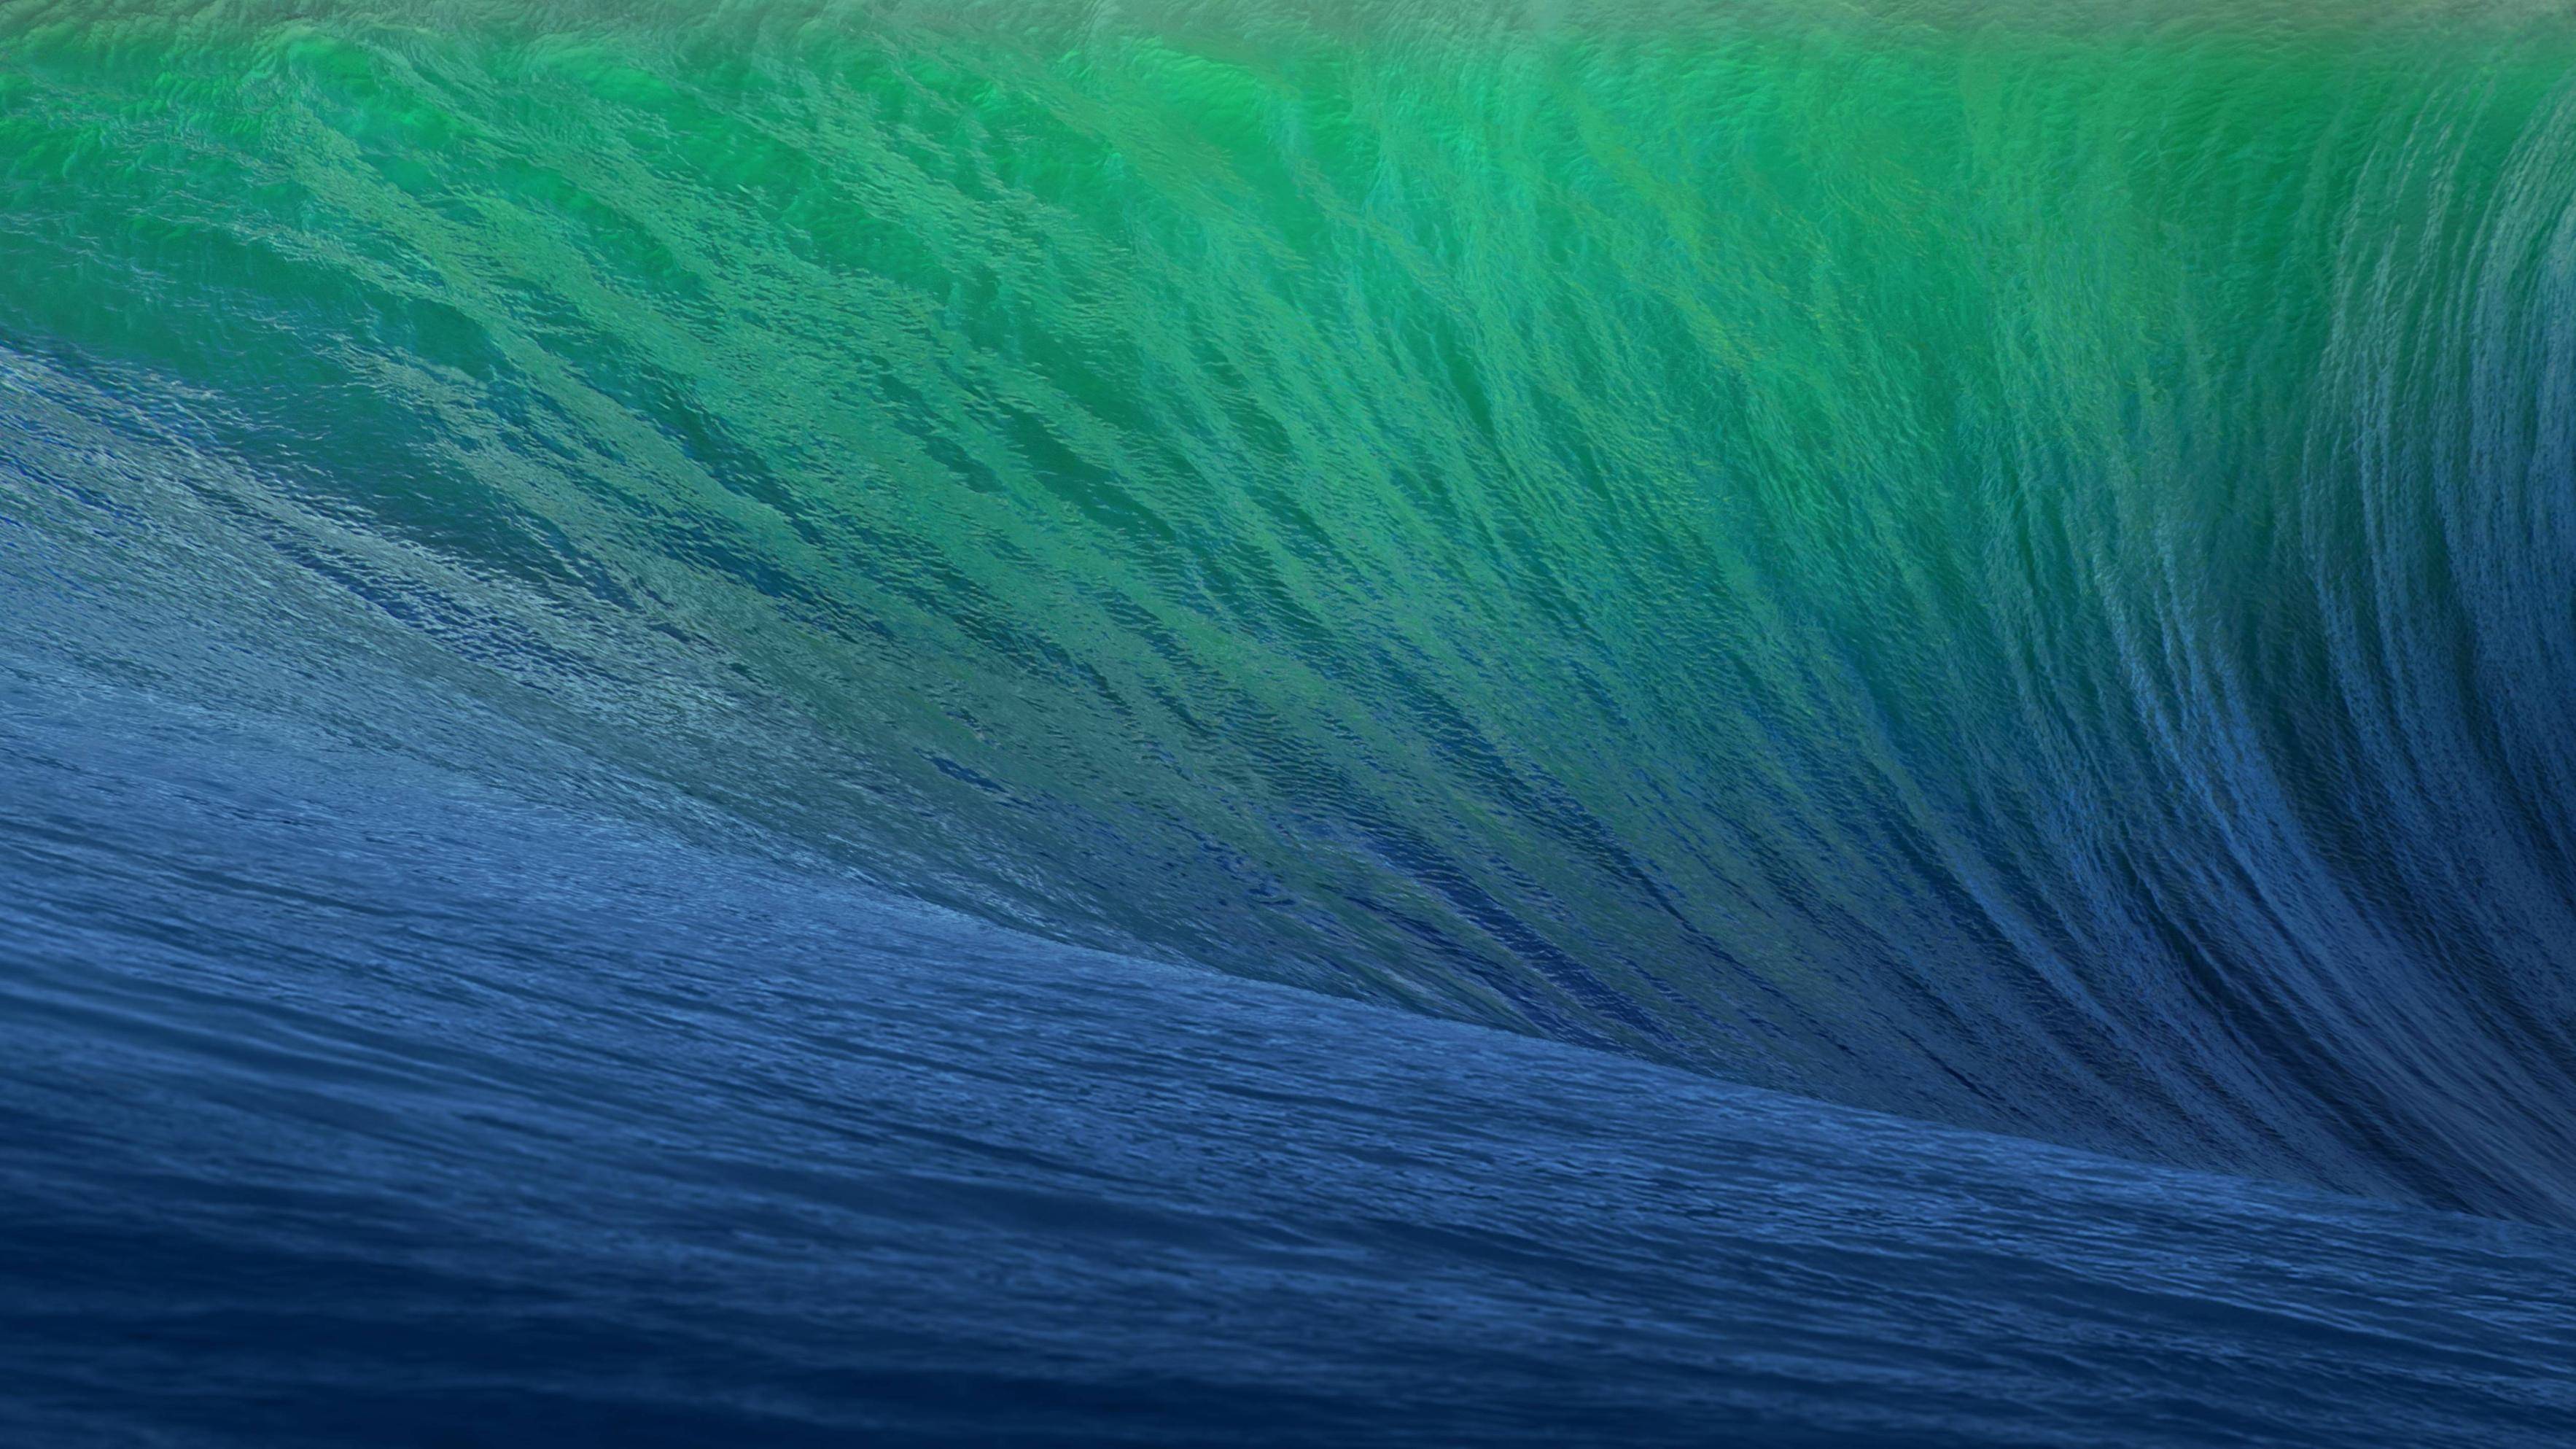 Mavericks desktop background picture settings moved from /Library